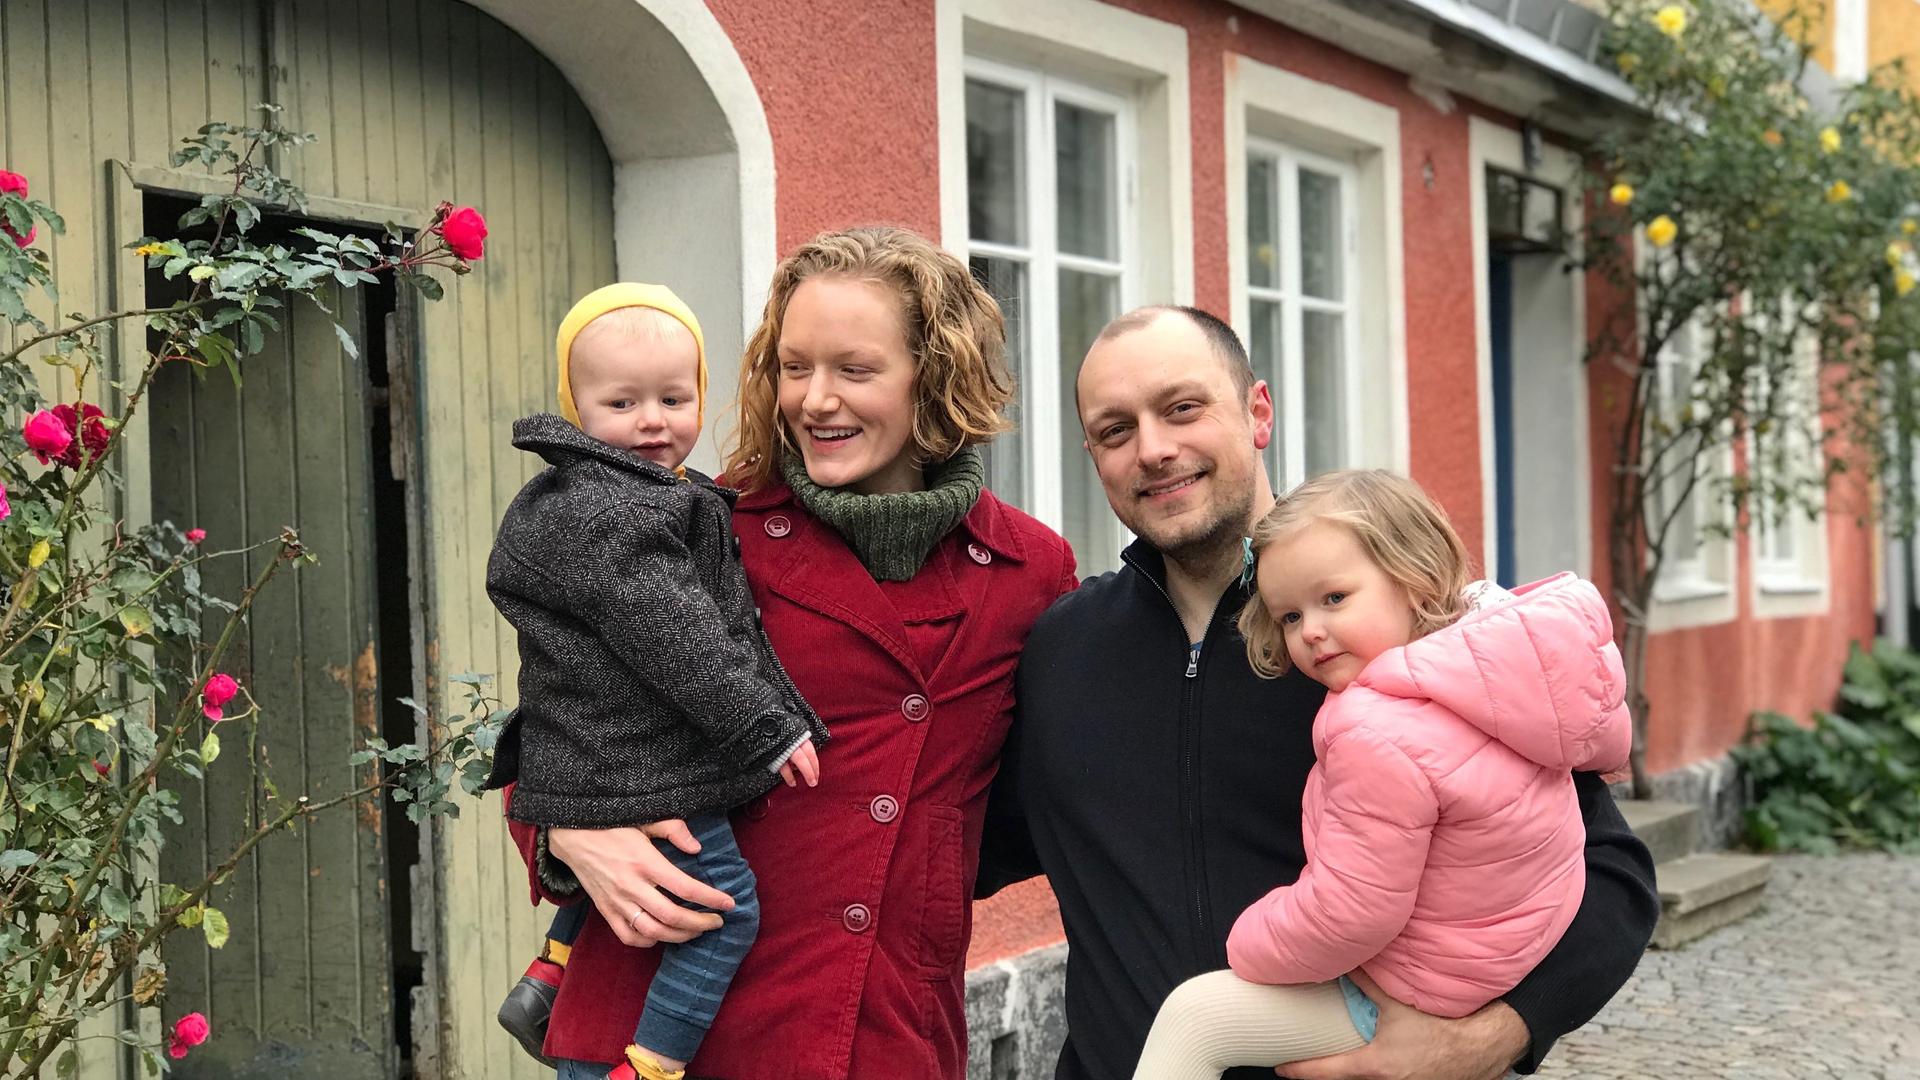 Allyson Plumberg and her family plan to return from Sweden to the United States. Plumberg says Sweden's response to the coronavirus has changed the way she views life in the country. 